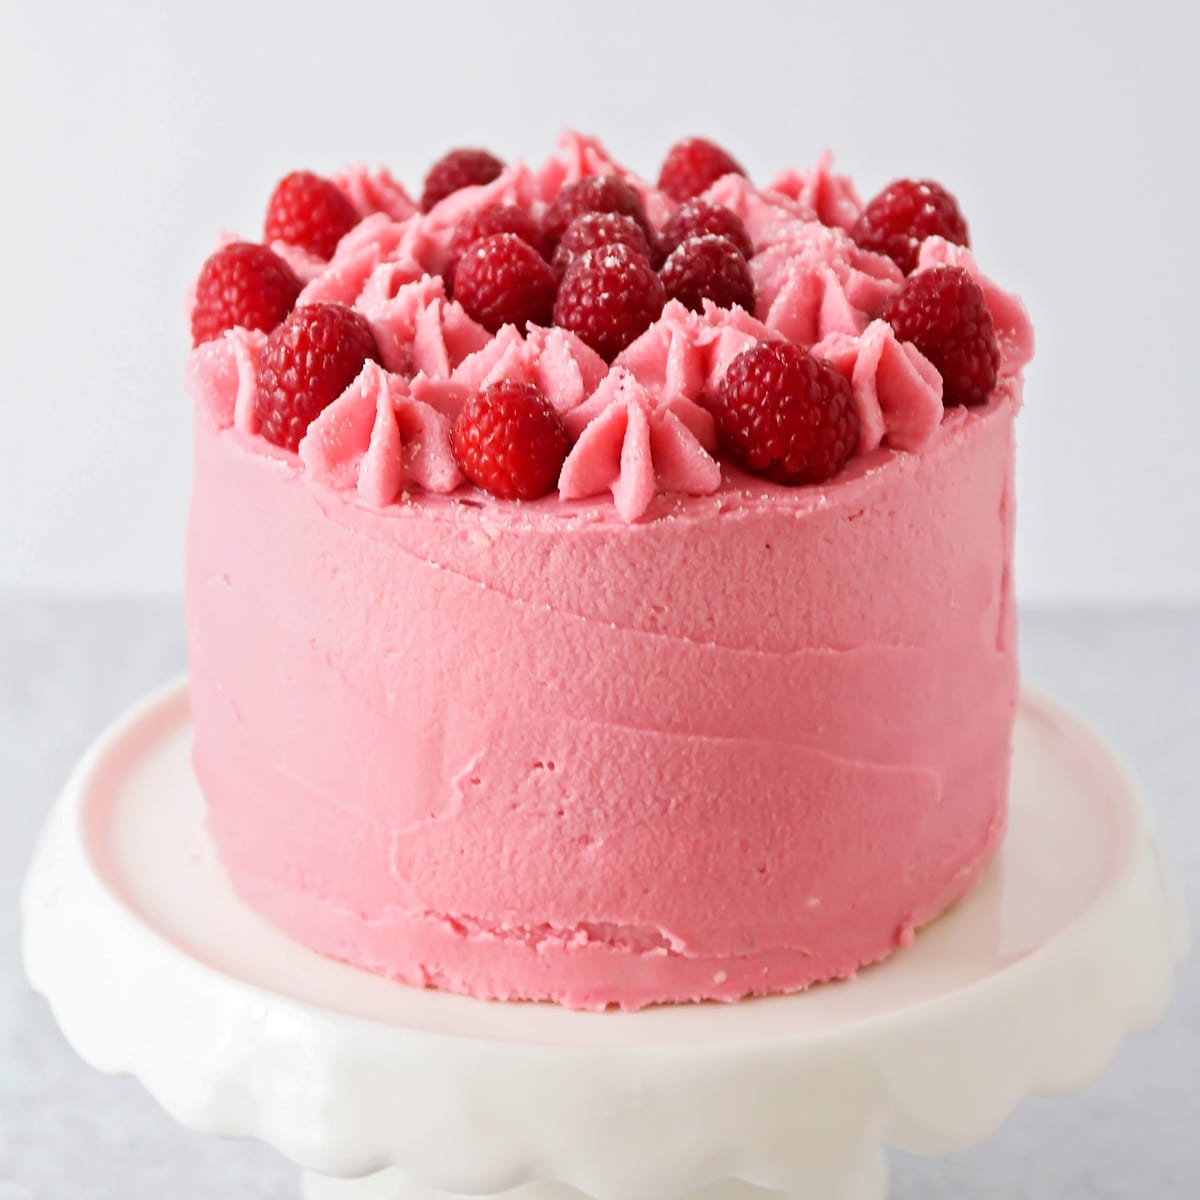 Lemon raspberry cake frosted and topped with fresh berries.